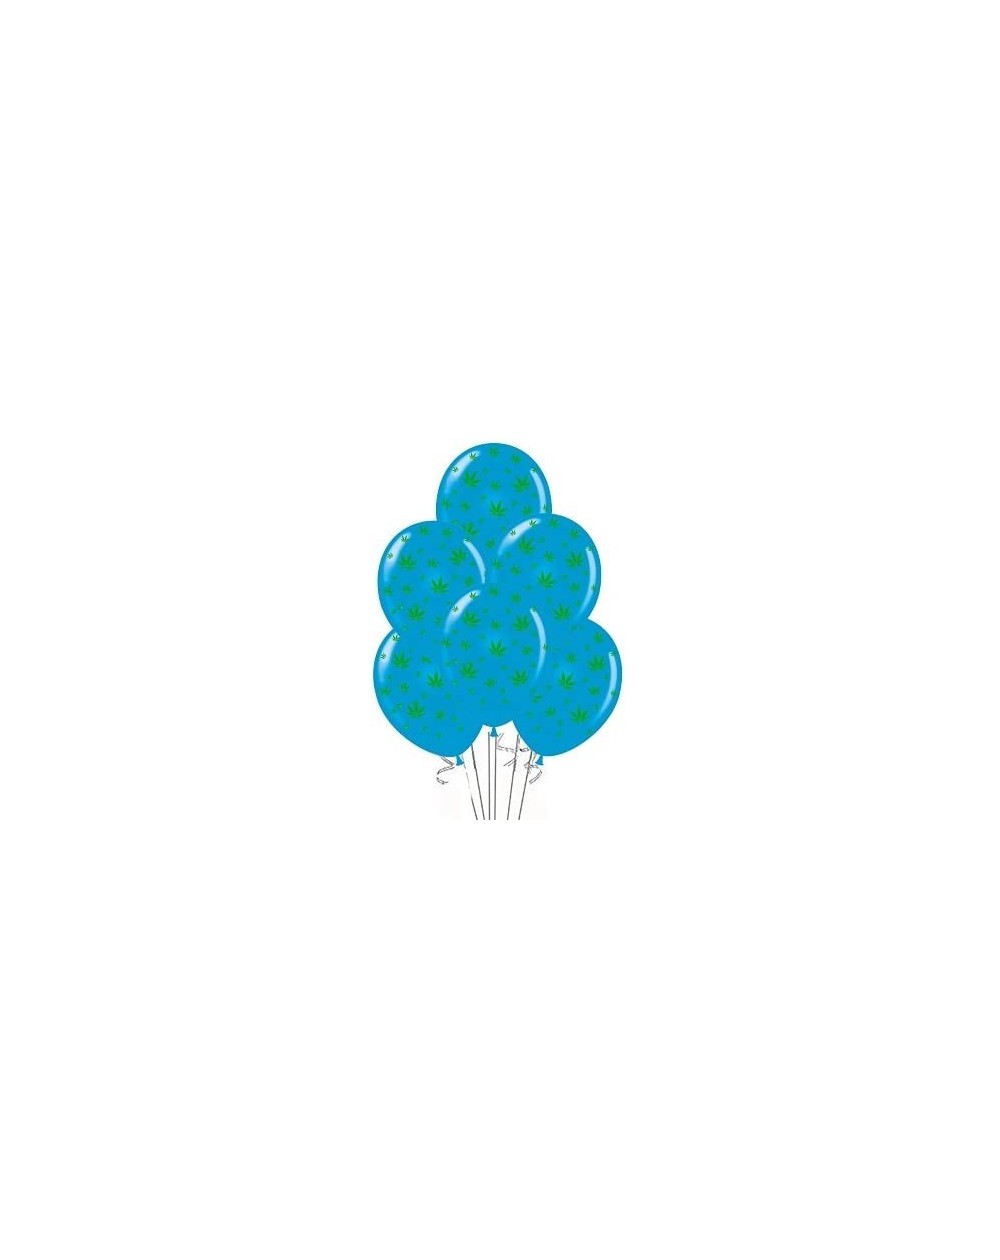 Balloons Marijuana Balloons Party-TEX 11in Premium Blue with All-Over Print Green Marijuana Leaves Pkg/12 - Blue and Black - ...